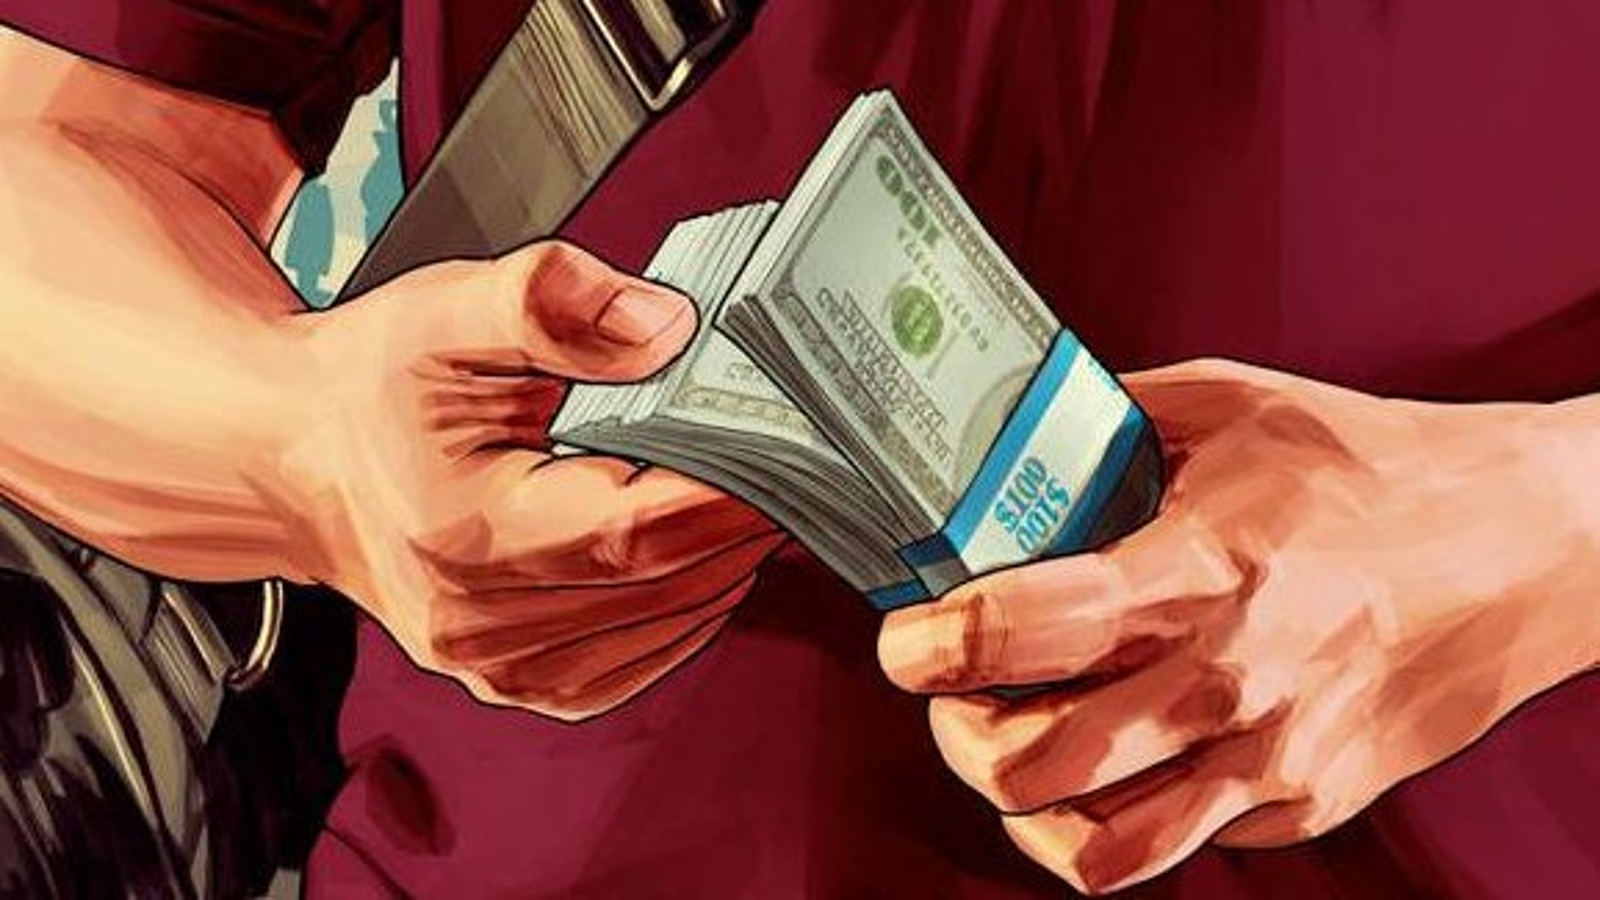 GTA 6 leak: Will players have to shell out hundreds of dollars?